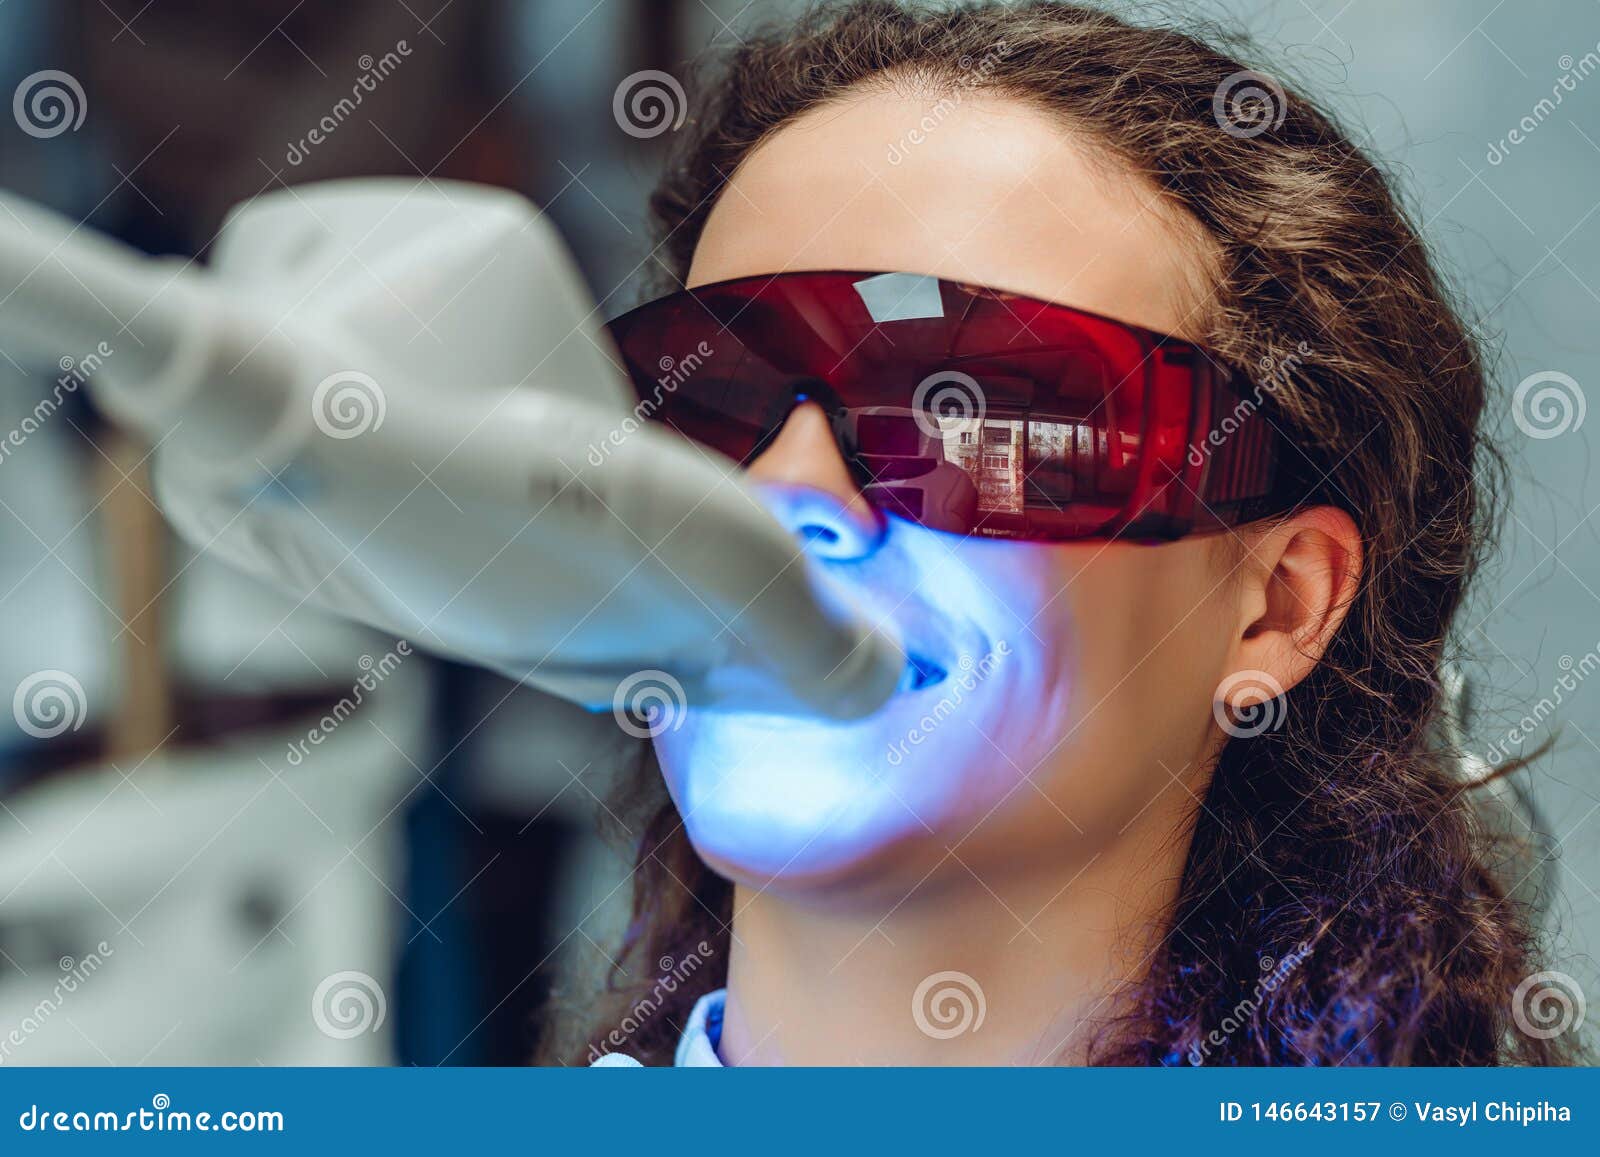 young woman whiten teeth at the dentist. close up view